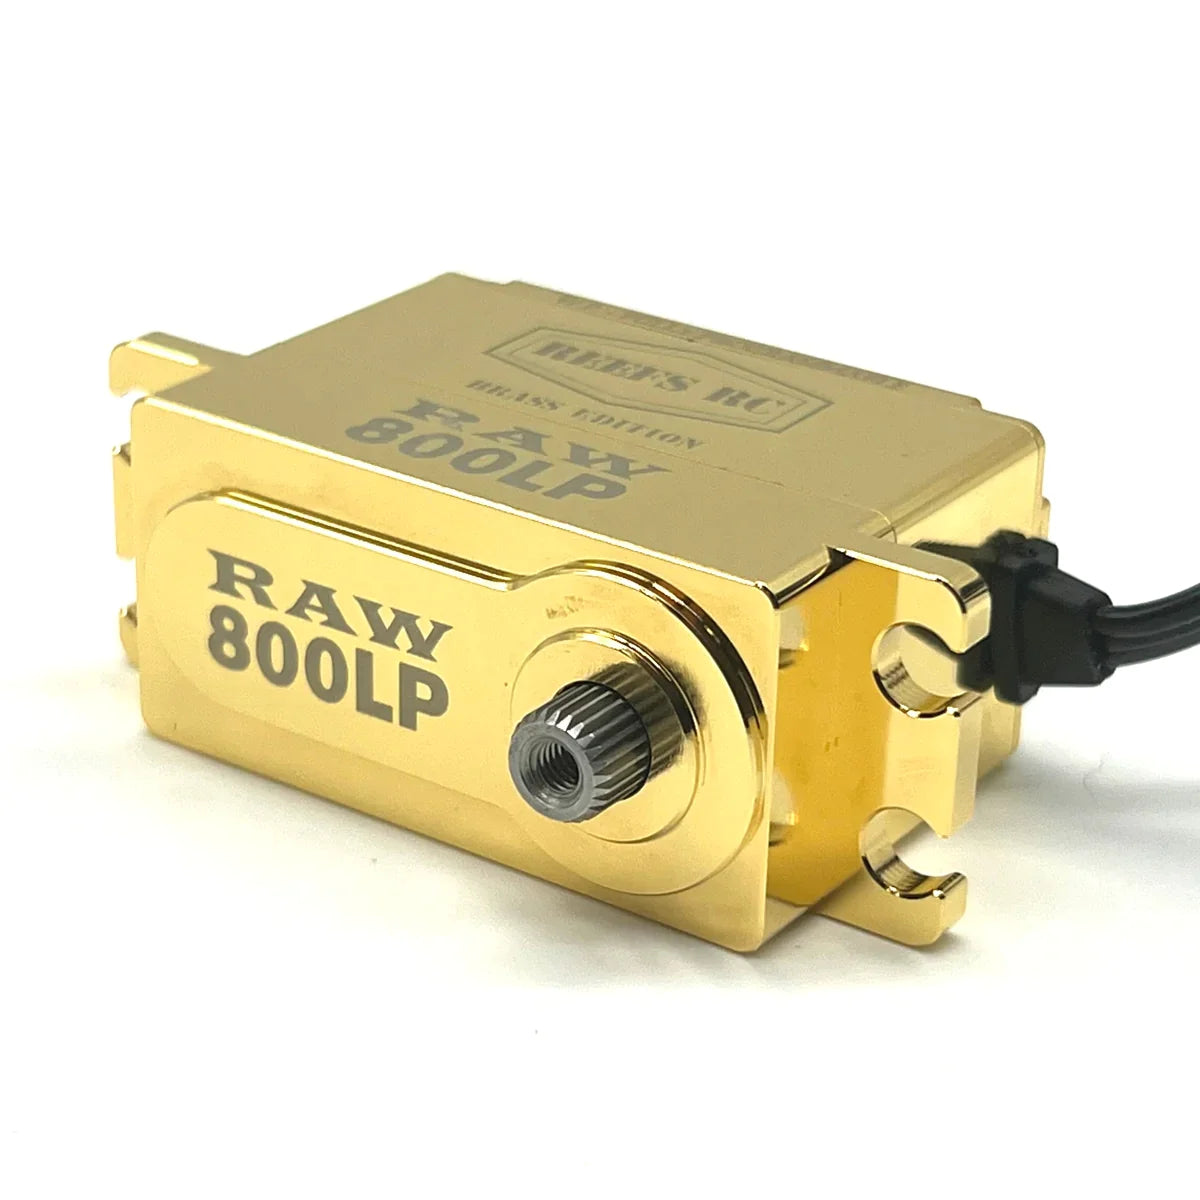 Reef's RC - RAW800LP Brass Edition, Fully Programmable, Brushless Low Profile Servo - SEHREEFS160